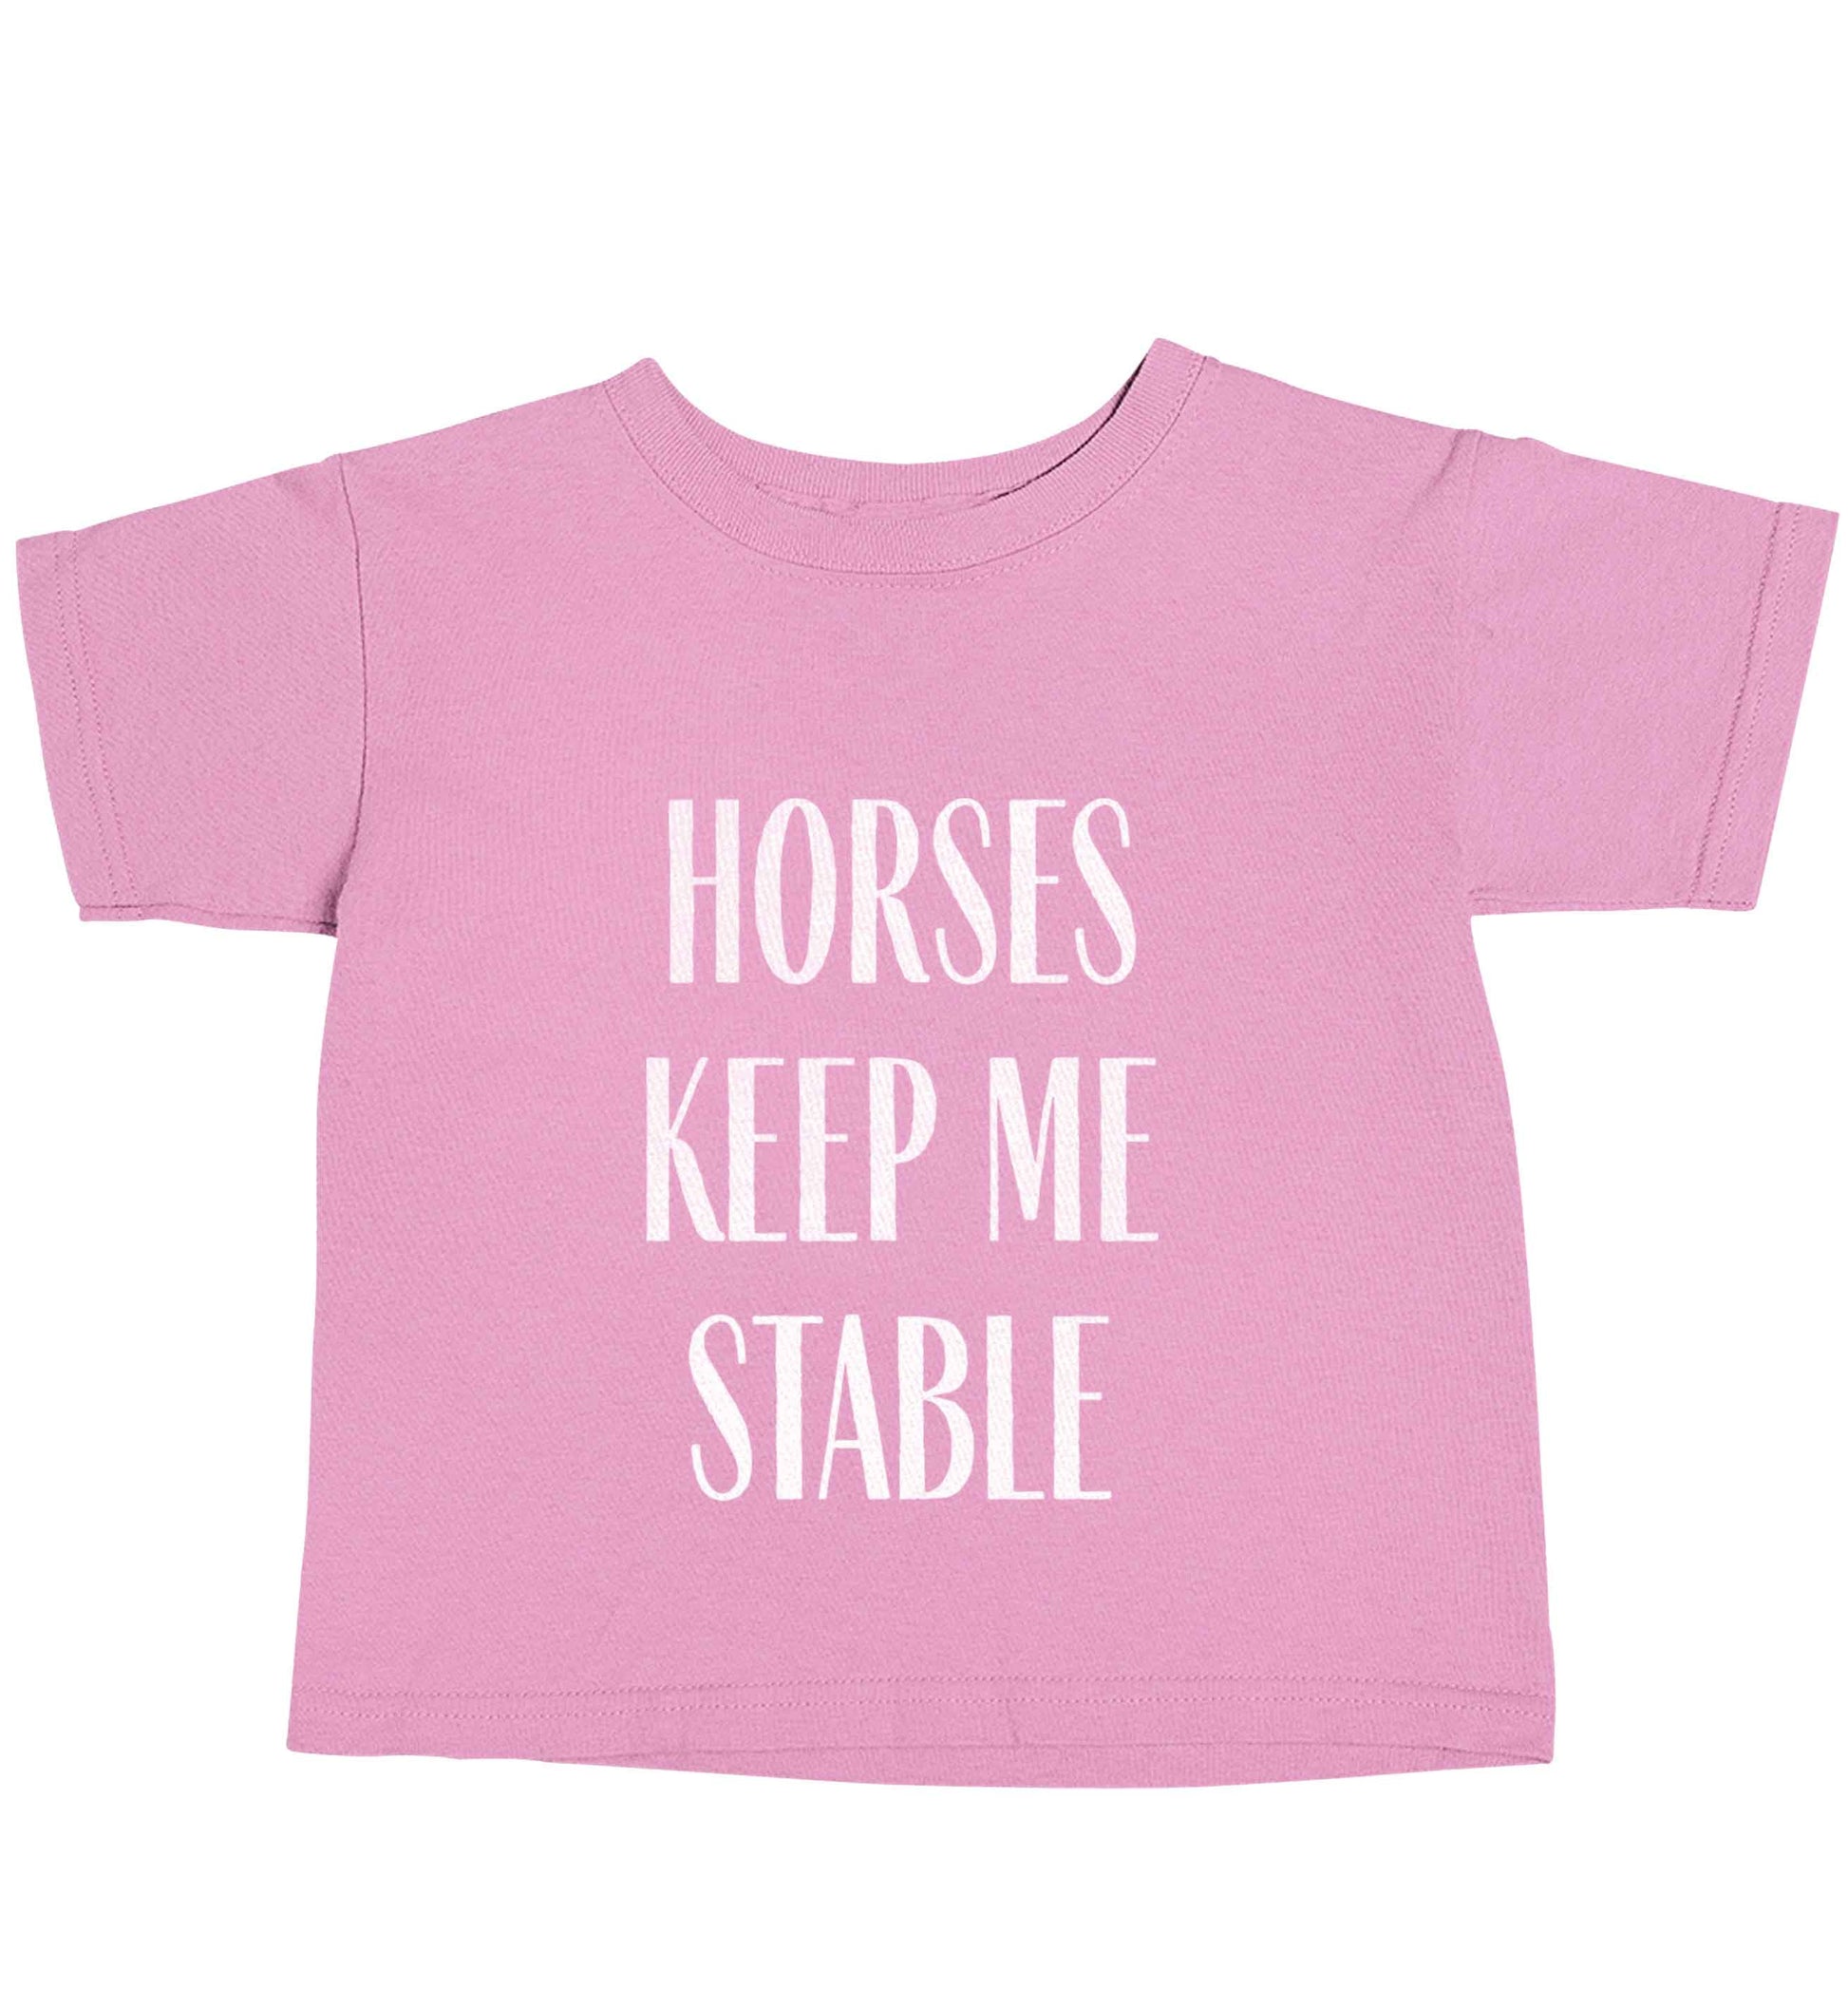 Horses keep me stable light pink baby toddler Tshirt 2 Years